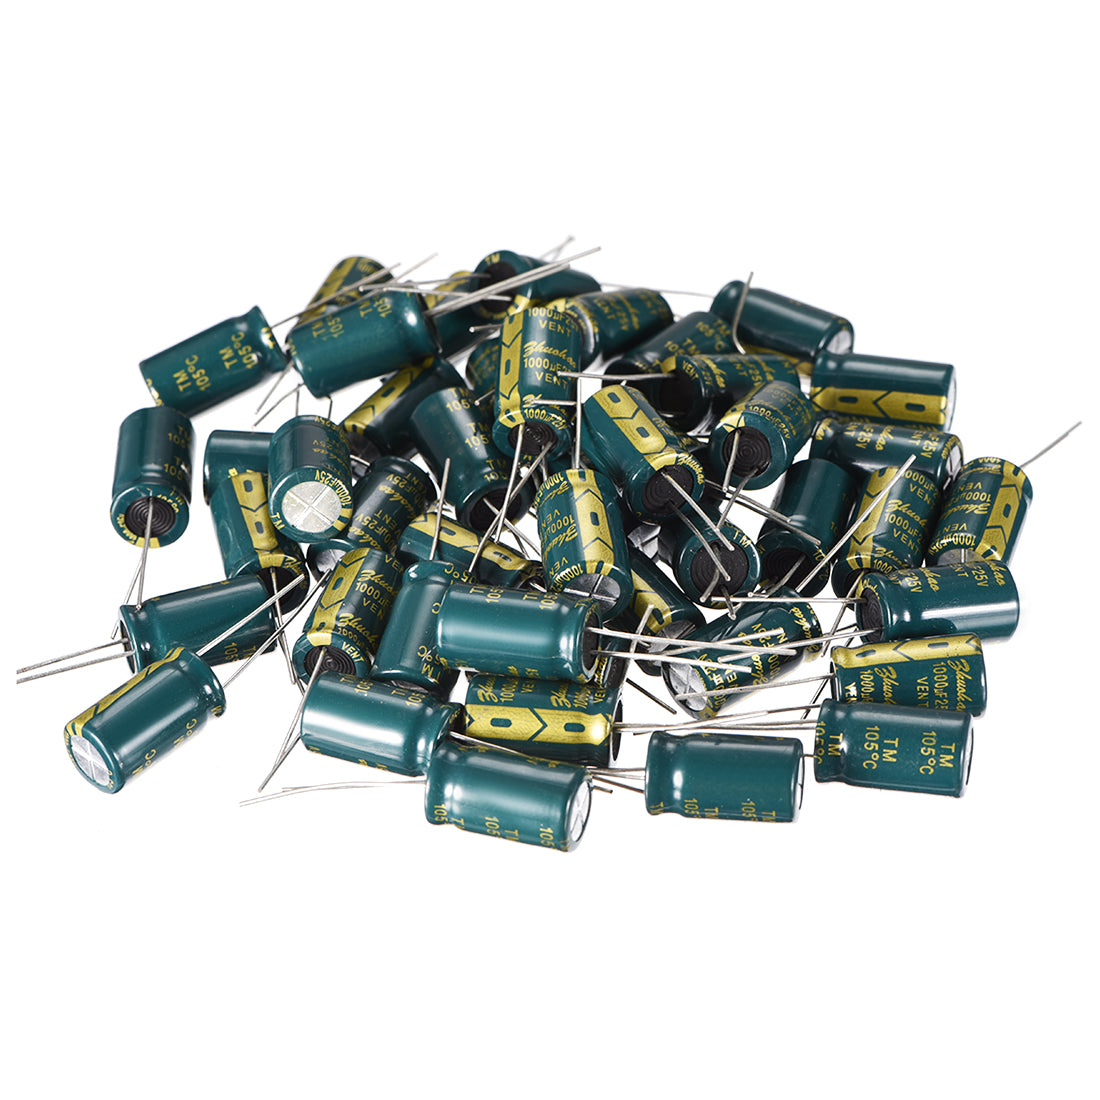 uxcell Uxcell Aluminum Radial Electrolytic Capacitor Low ESR Green with 1000UF 25V 105 Celsius Life 3000H 10 x 17 mm High Ripple Current,Low Impedance 50pcs